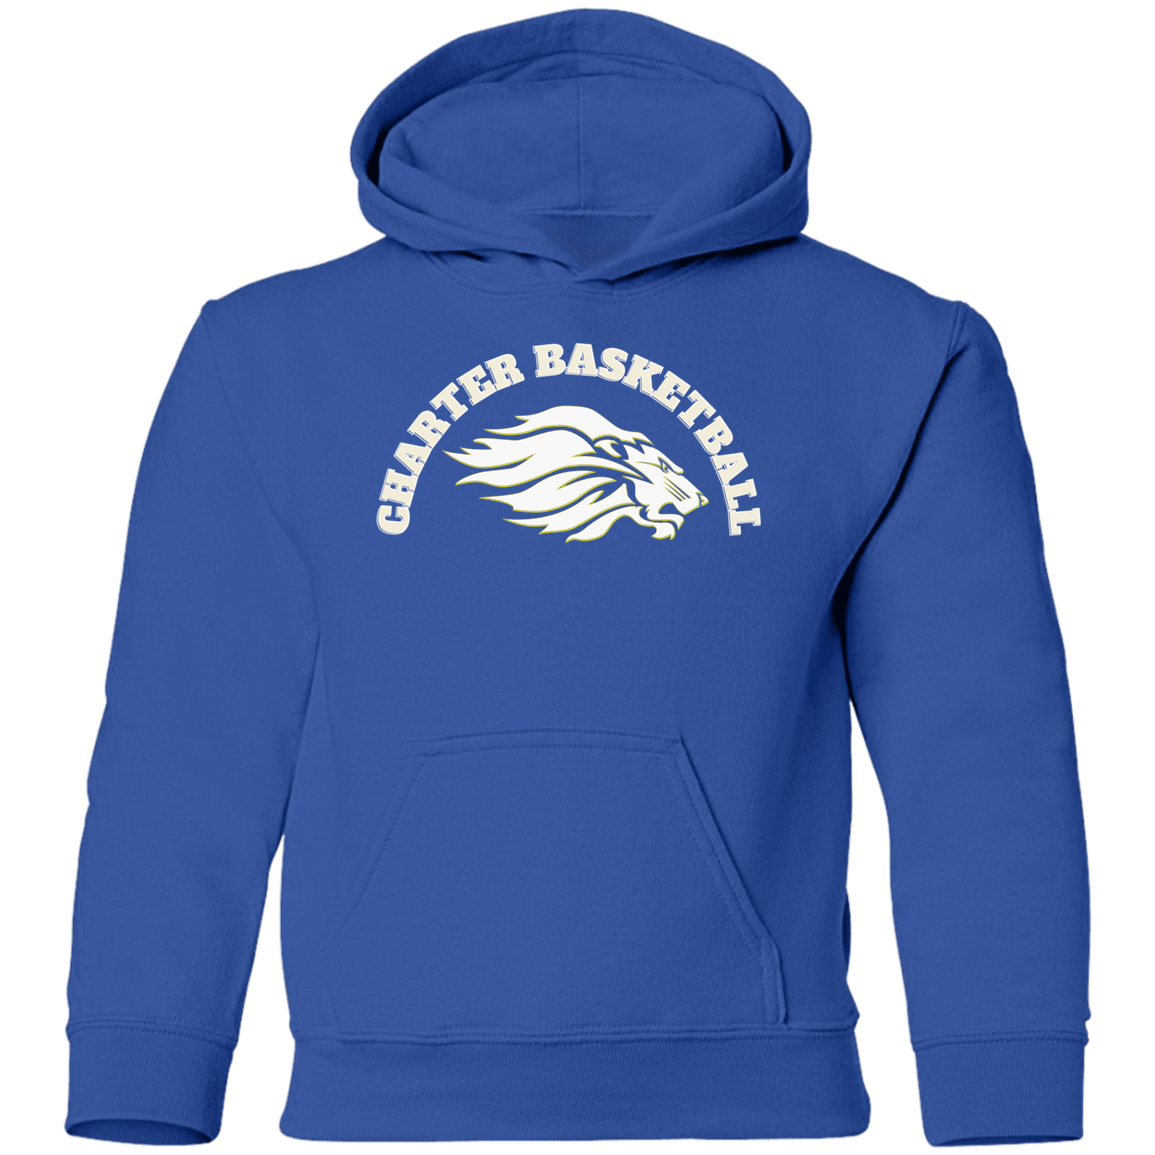 Charter Basketball Youth Pullover Hoodie